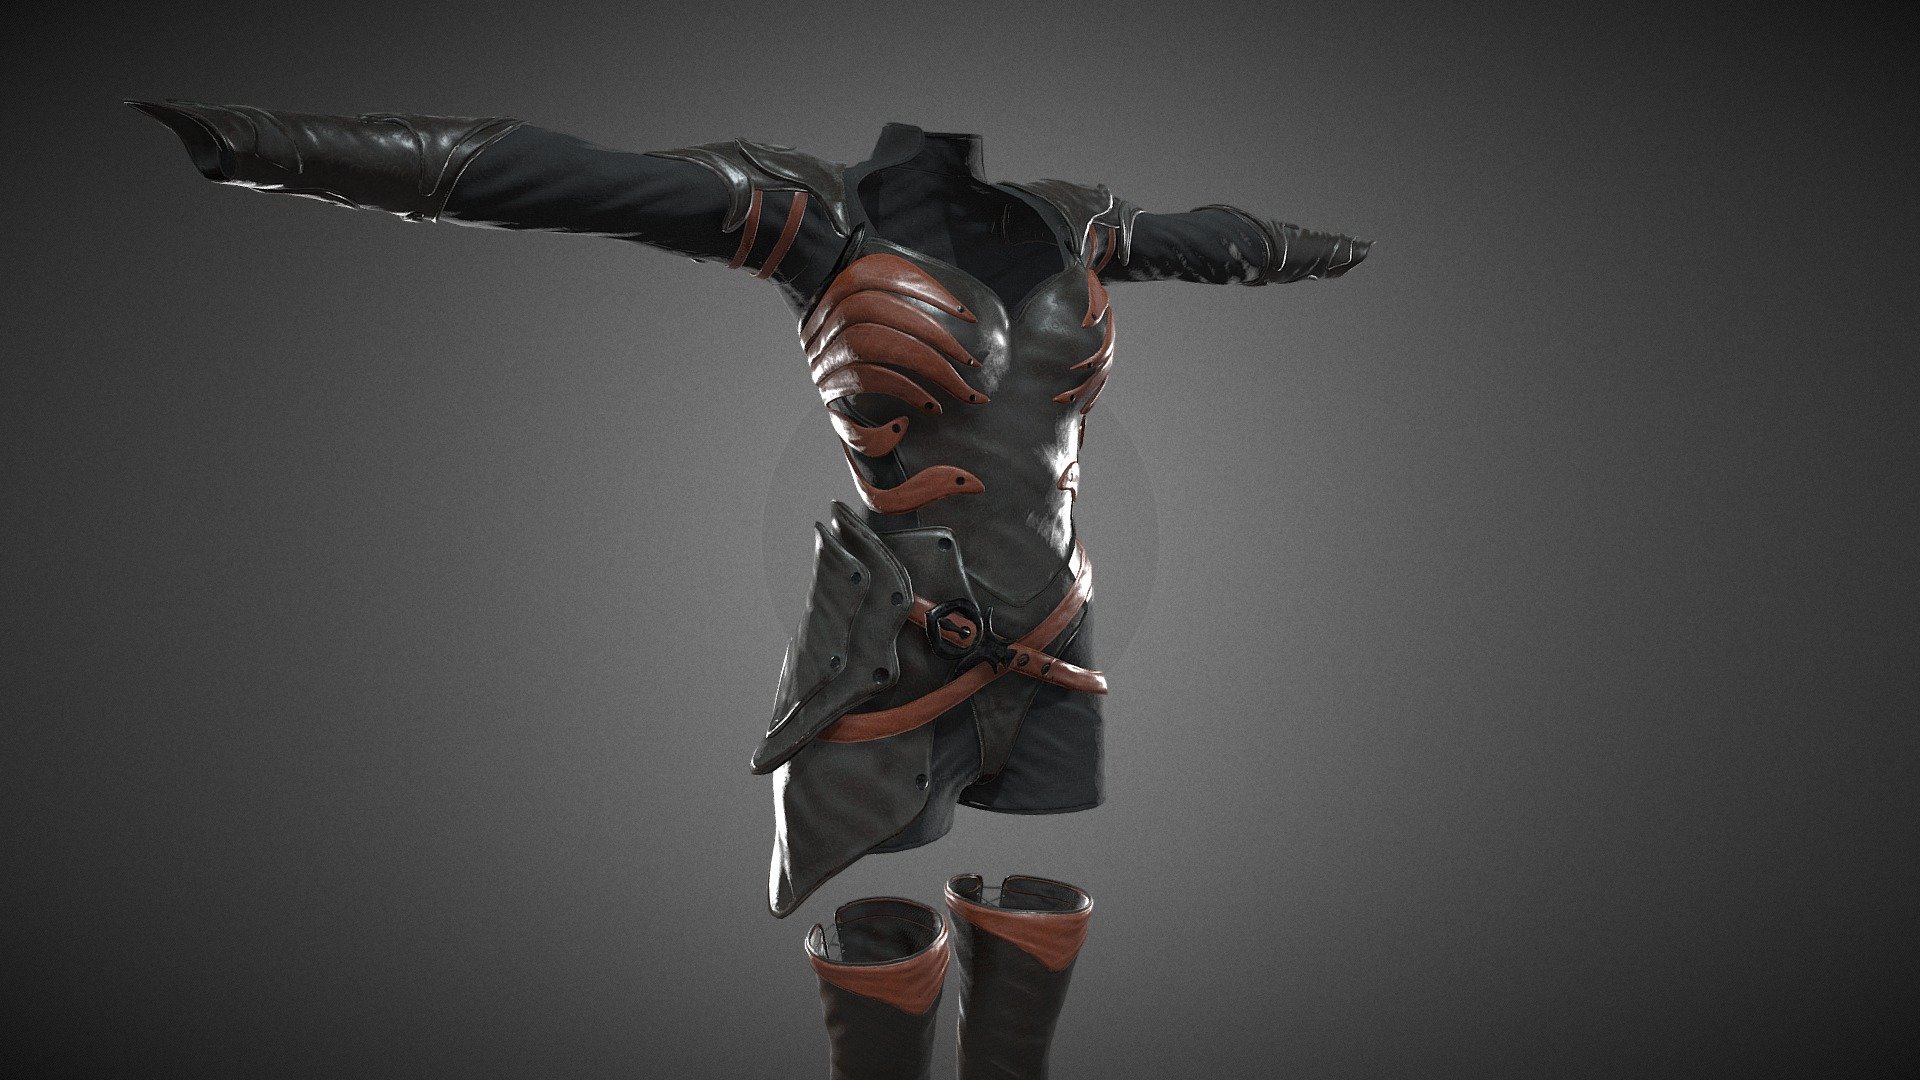 CG StudioX Present :
Female Medieval Outfit 1 lowpoly/PBR




This is Female Medieval Outfit 1 Comes with Specular and Metalness PBR.

The photo been rendered using Marmoset Toolbag 3 (real time game engine )


Features :



Comes with Specular and Metalness PBR 4K texture .

Good topology.

Low polygon geometry.

The Model is prefect for game for both Specular workflow as in Unity and Metalness as in Unreal engine .

The model also rendered using Marmoset Toolbag 3 with both Specular and Metalness PBR and also included in the product with the full texture.

The product has ID map in every part for changing any part in the model .

The texture can be easily adjustable .


Texture :



ALL Texture [Albedo -Normal-Metalness -Roughness-Gloss-Specular-ID-AO] (4096*4096)

Second objects (Top-Boots) each one has it own UV set and textures.


Files :
Marmoset Toolbag 3 ,Maya,,FBX,OBj with all the textures.




Contact me for if you have any questions.
 - Female Medieval Outfit 1 - Buy Royalty Free 3D model by CG StudioX (@CG_StudioX) 3d model